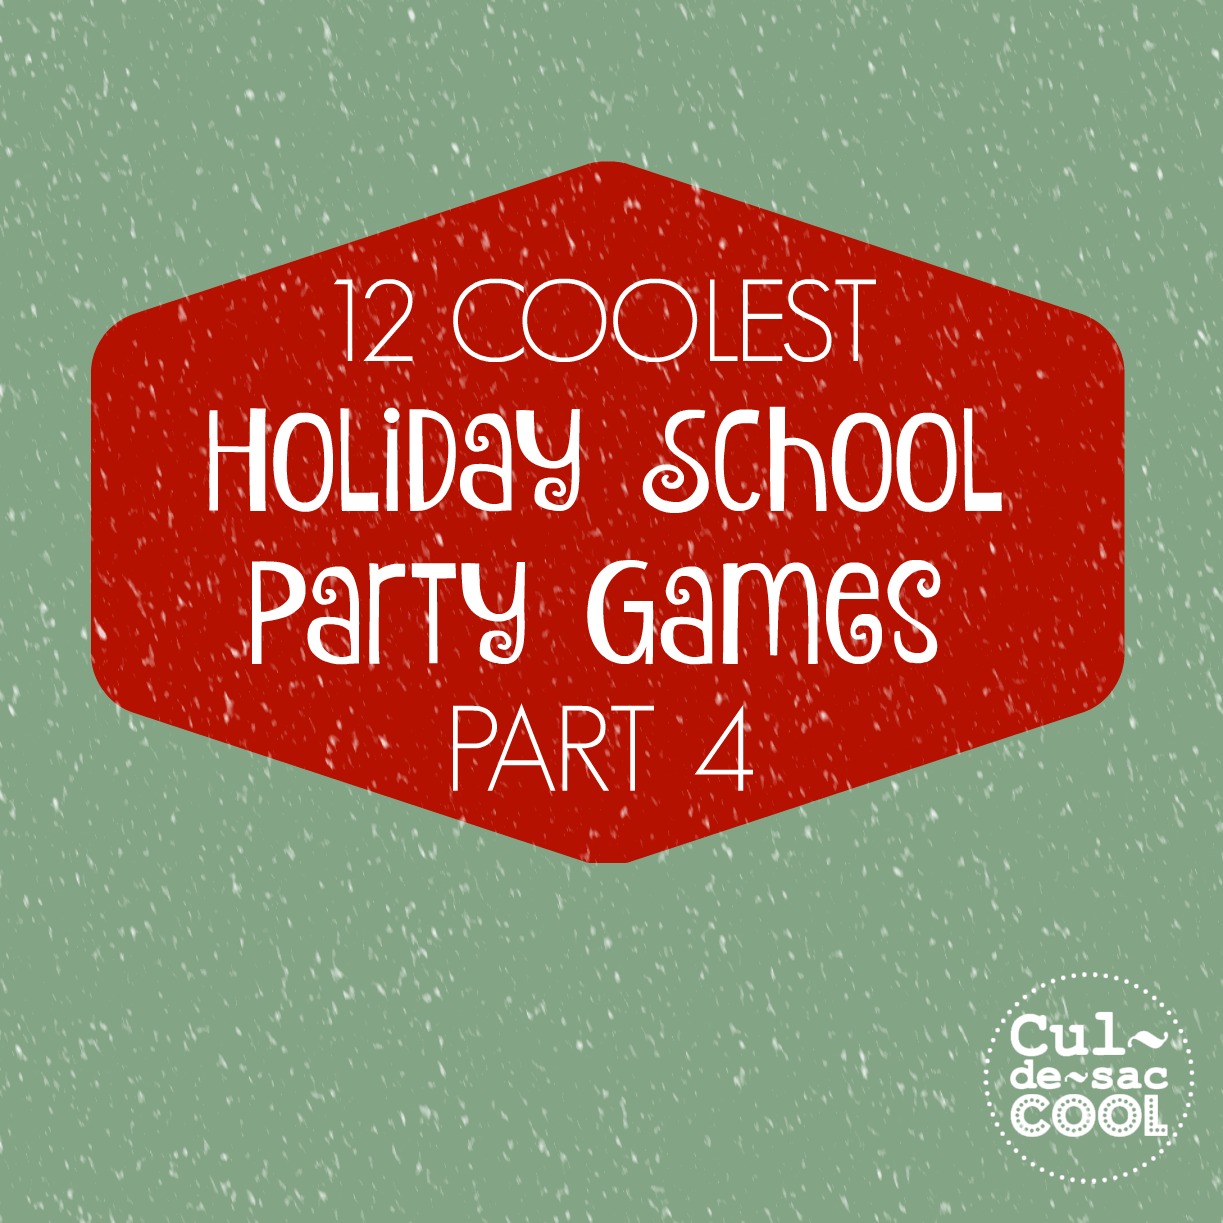 12 Coolest Holiday School Party Games Part 4 cover 2